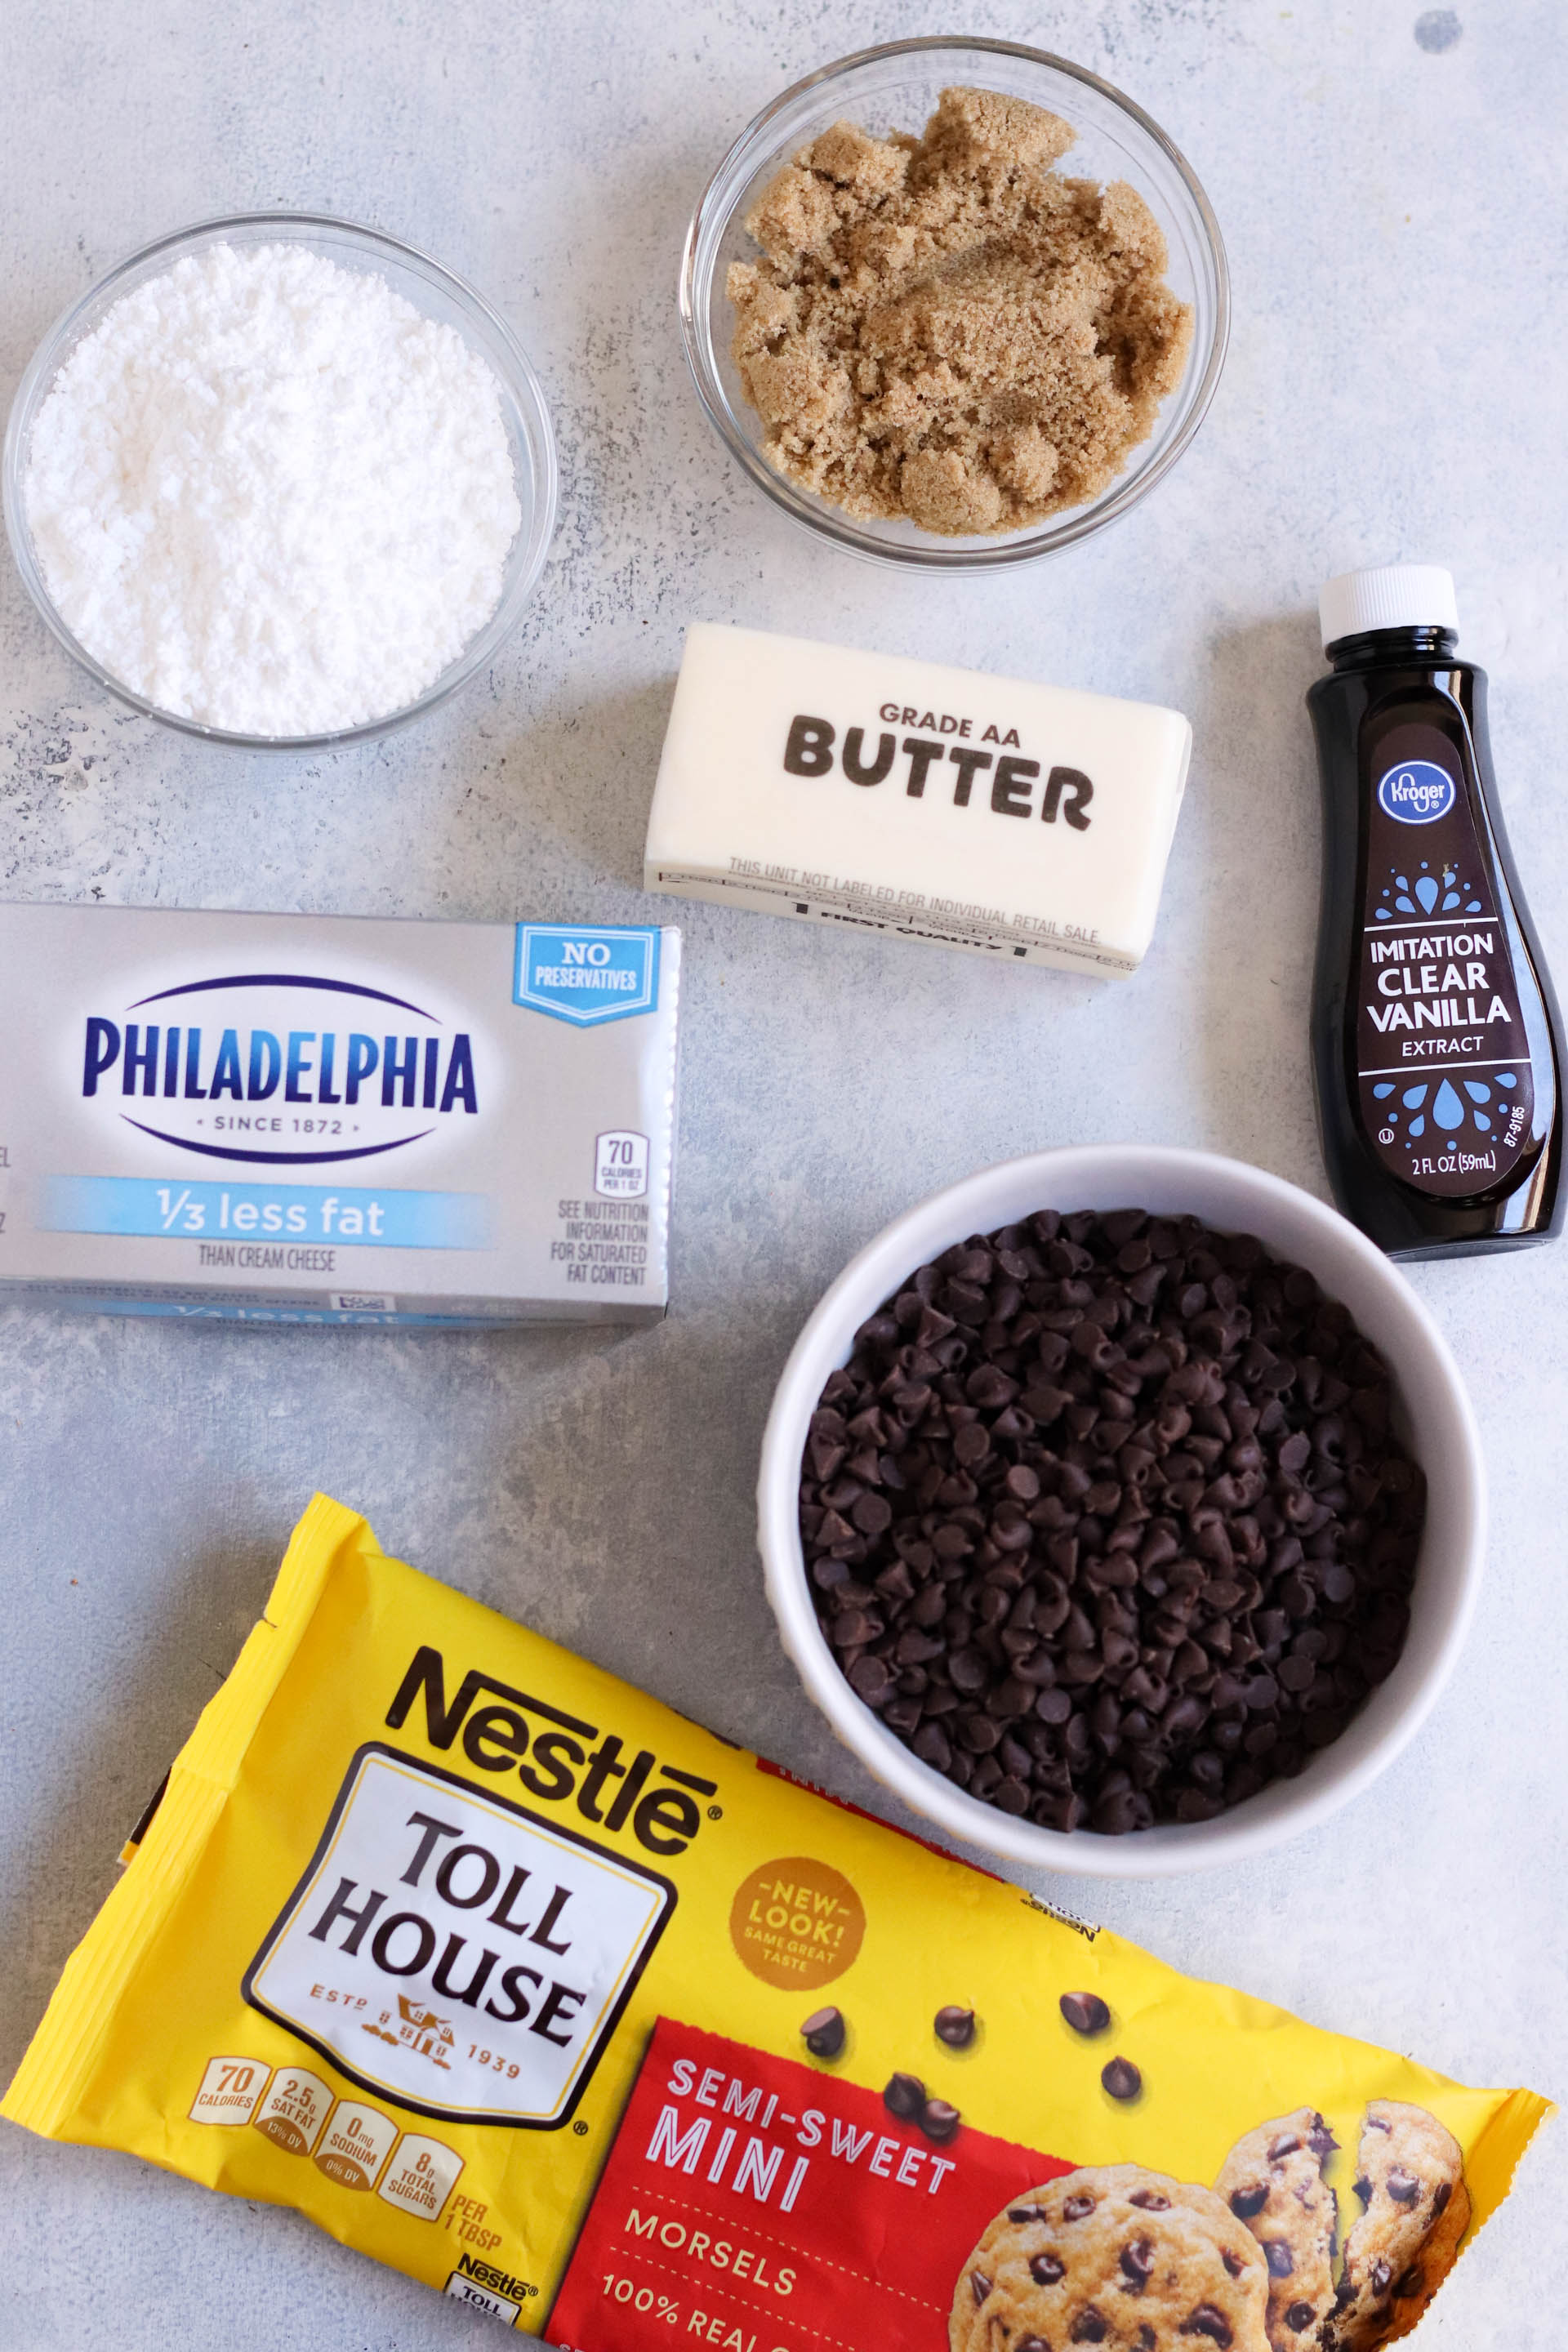 Ingredients needed to make Chocolate Chip Cookie Dough Dip